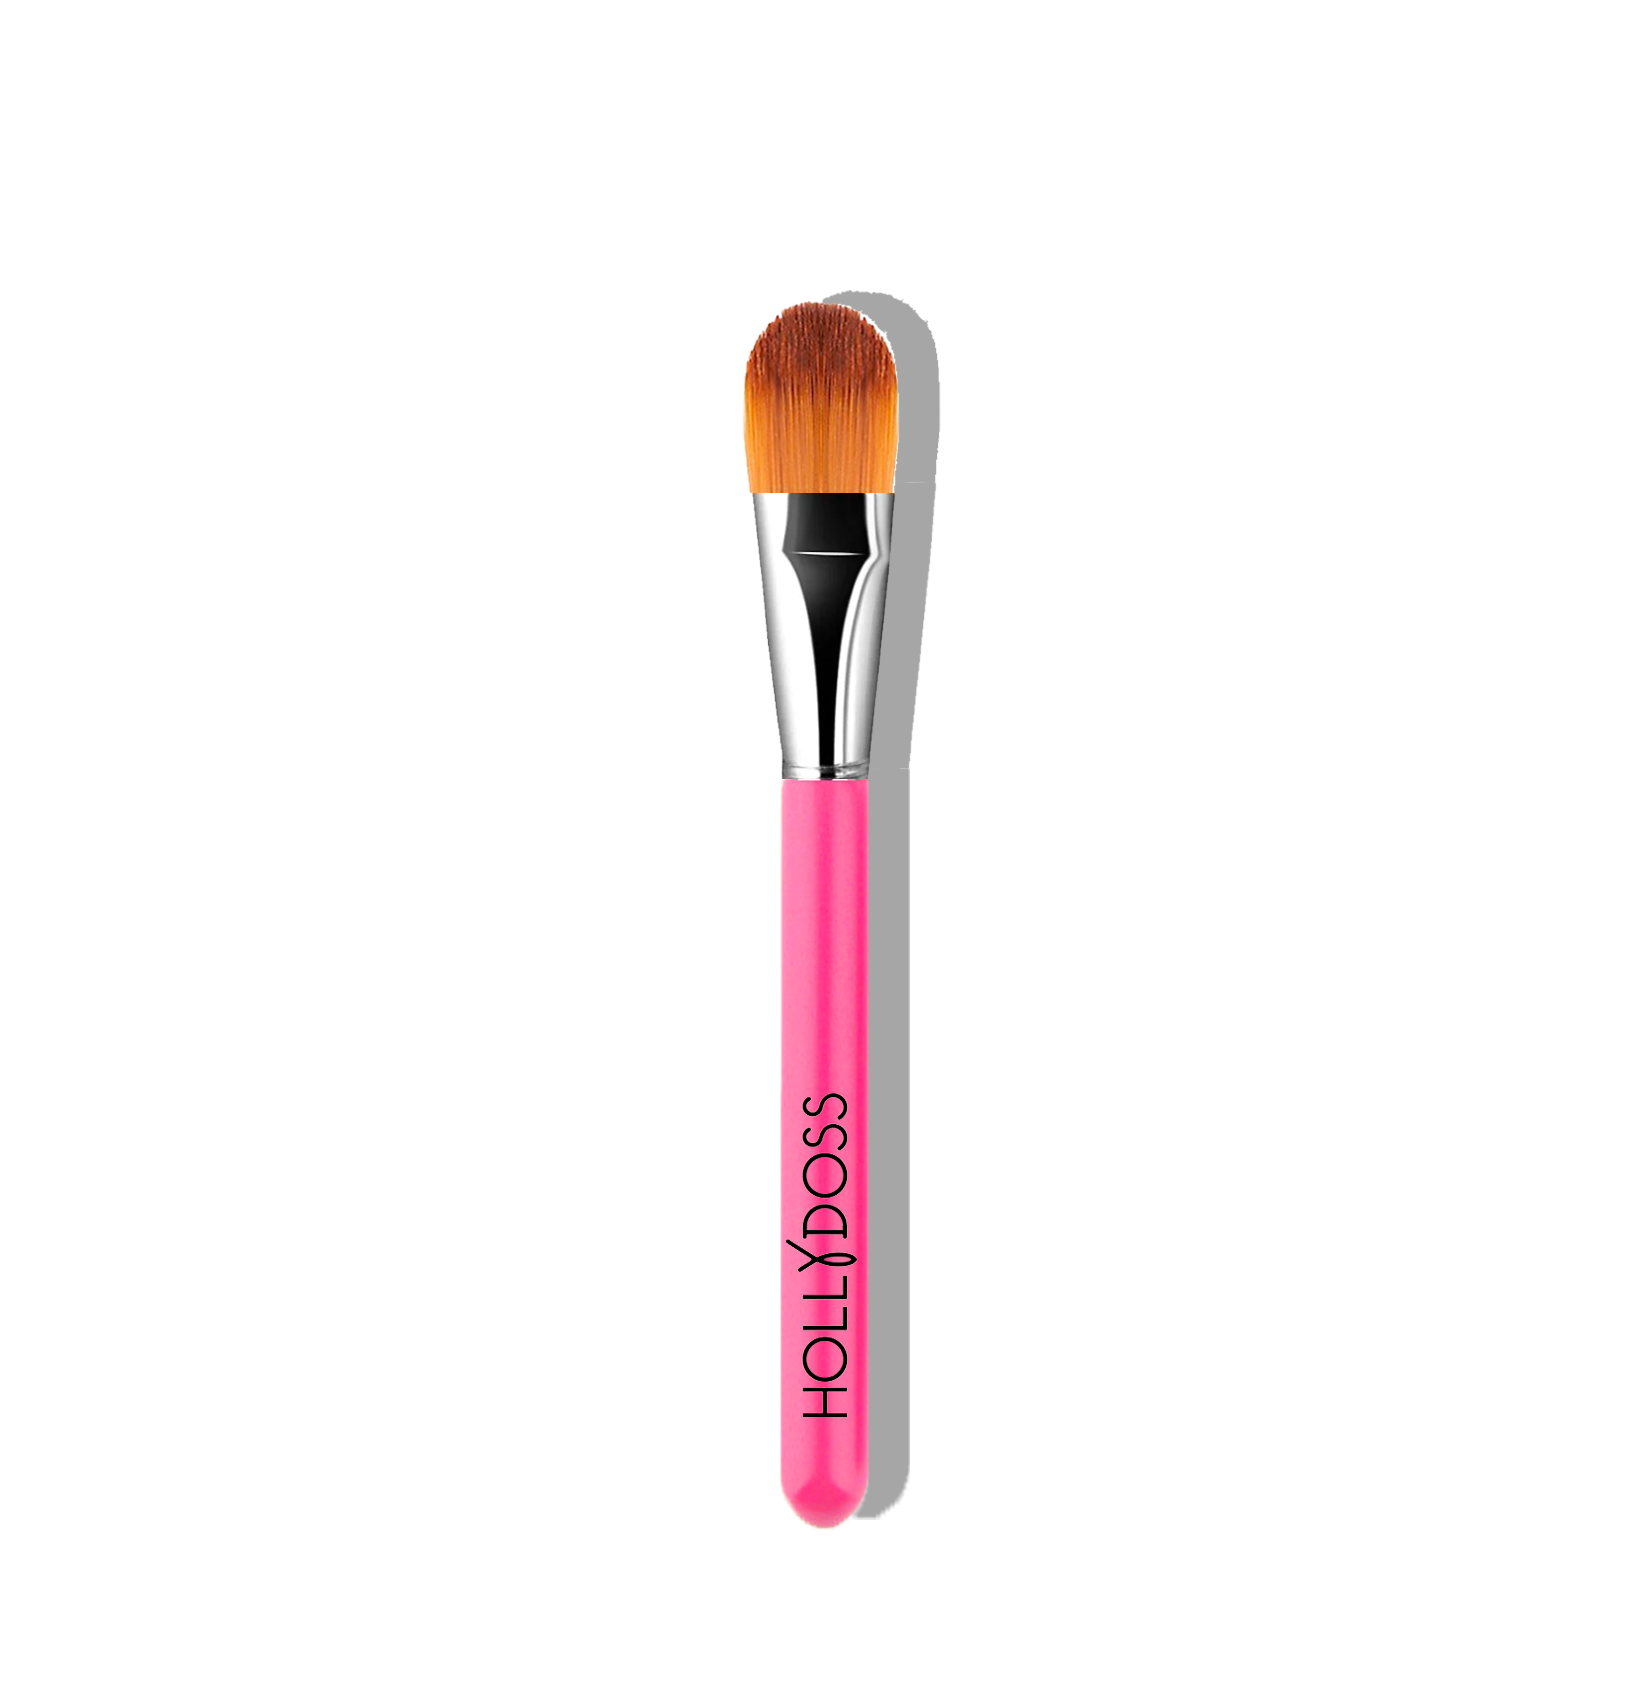 Concealer & Foundation Brush - #10 - Holly Doss Official